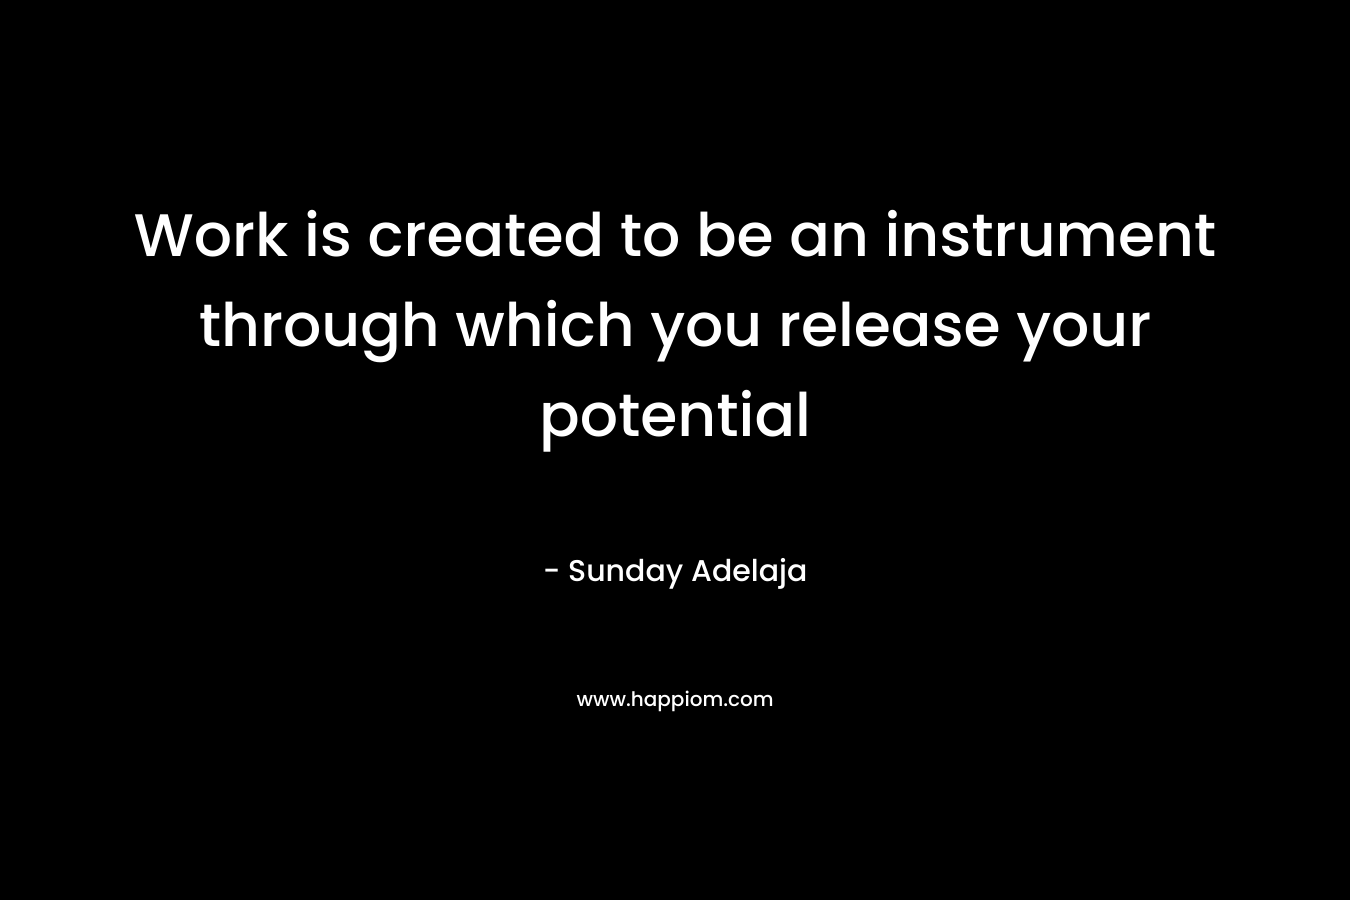 Work is created to be an instrument through which you release your potential